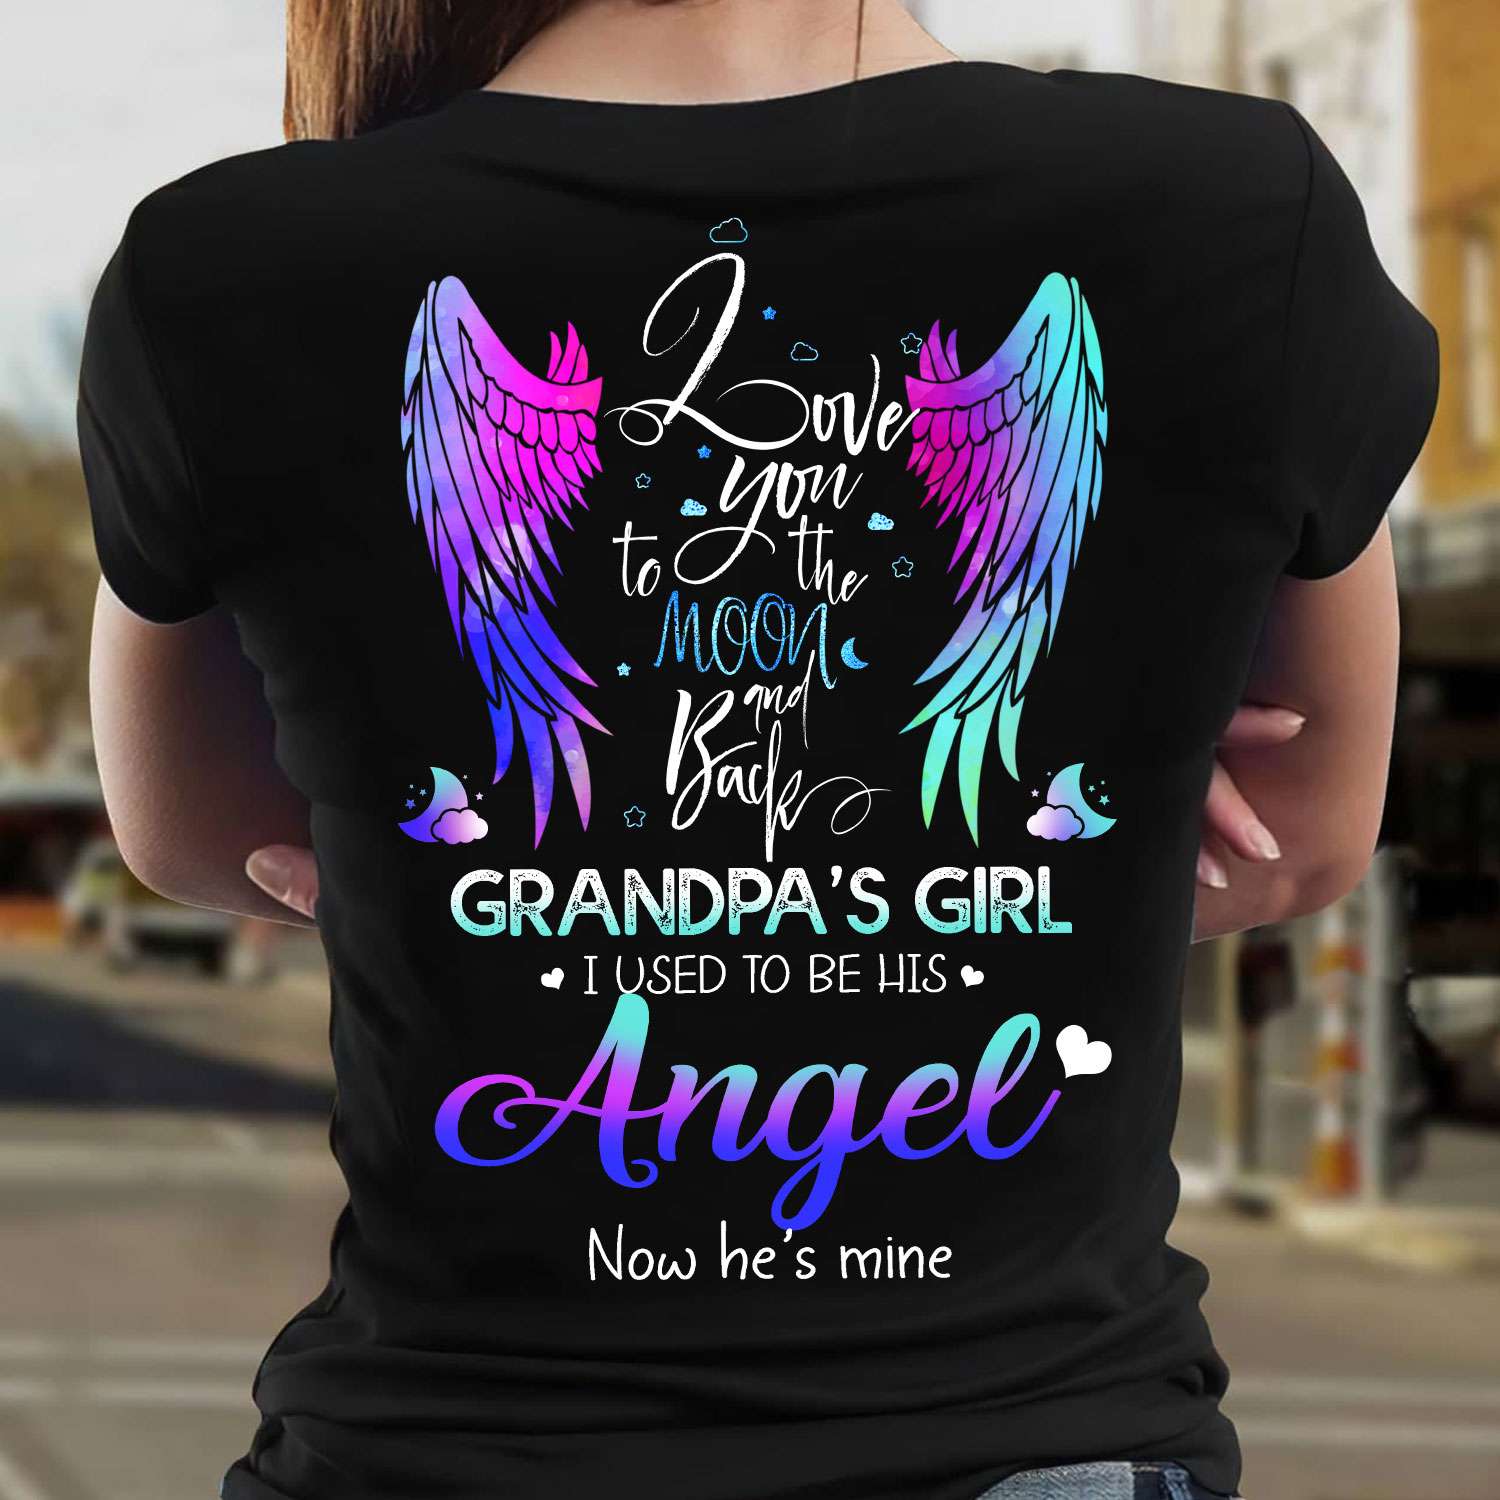 Love you to the moon and back grandpa's girl i used to be his angel now he's mine